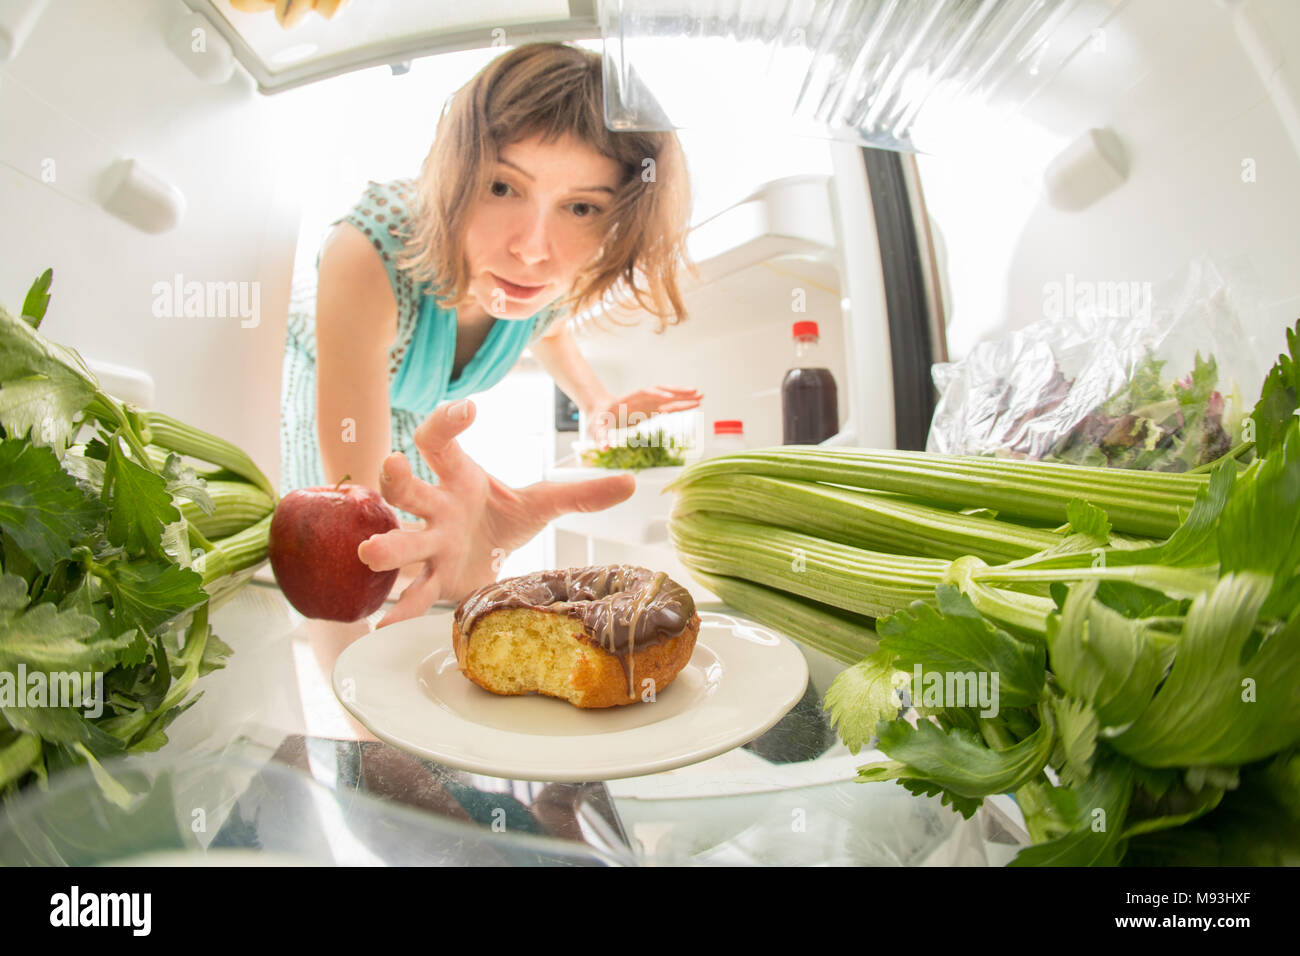 Diet struggle: A hand grabbing a donut from the open refrigerator full of greens. Stock Photo